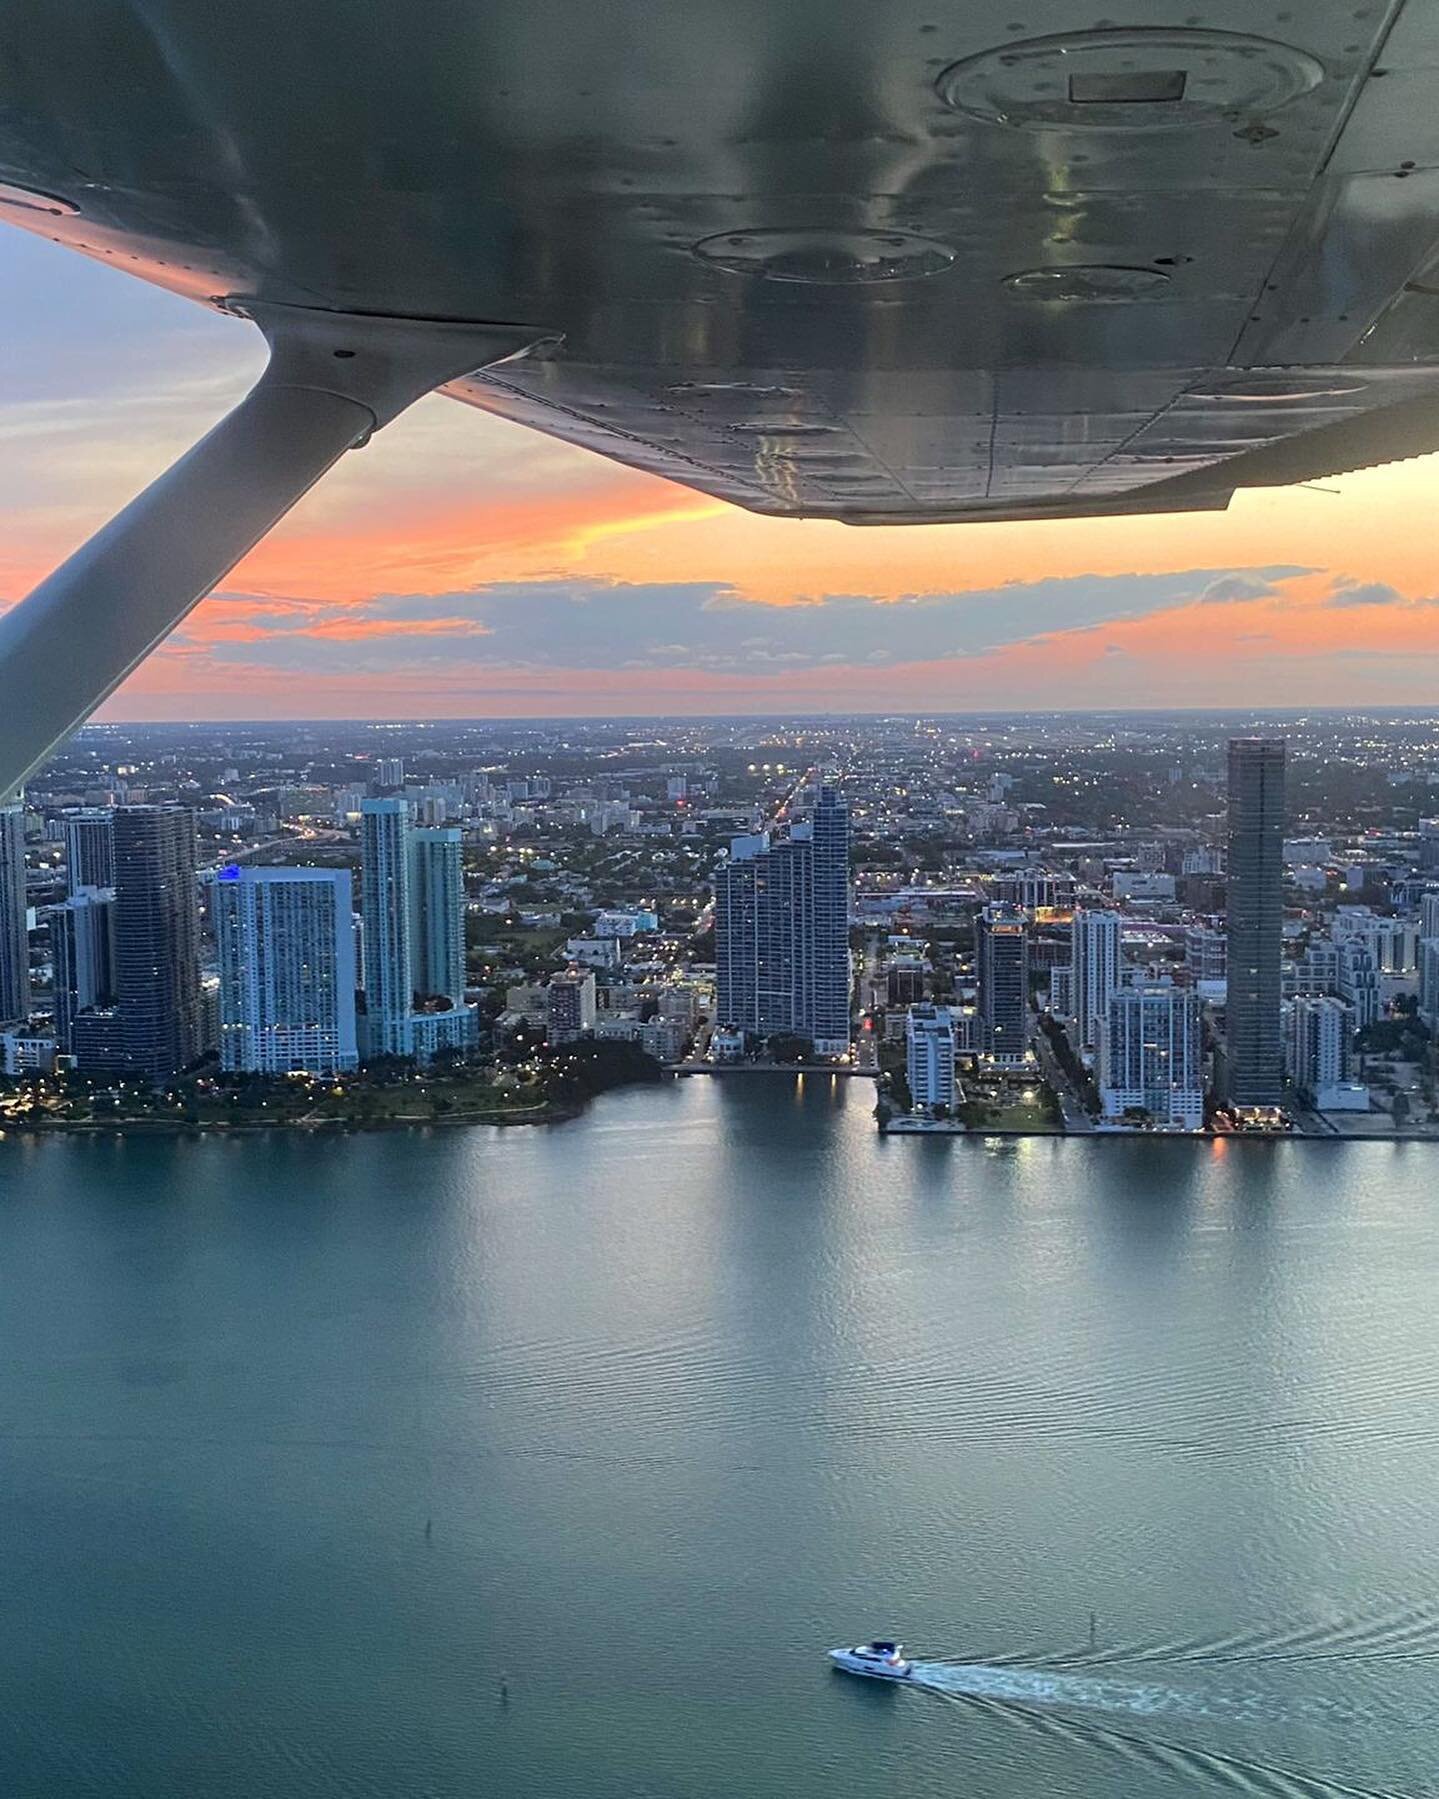 Beautiful sunset shot taken by the lovely @itslobna 📸🌅😍
.
.
.
#miami #mia #beach #beautiful #miamibeach #miamibeauty #thingstodomiami #fll #florida #citylife #citylights #building #watercolor #ocean #oceanview #boat #fly #flying #flywithus #smile 